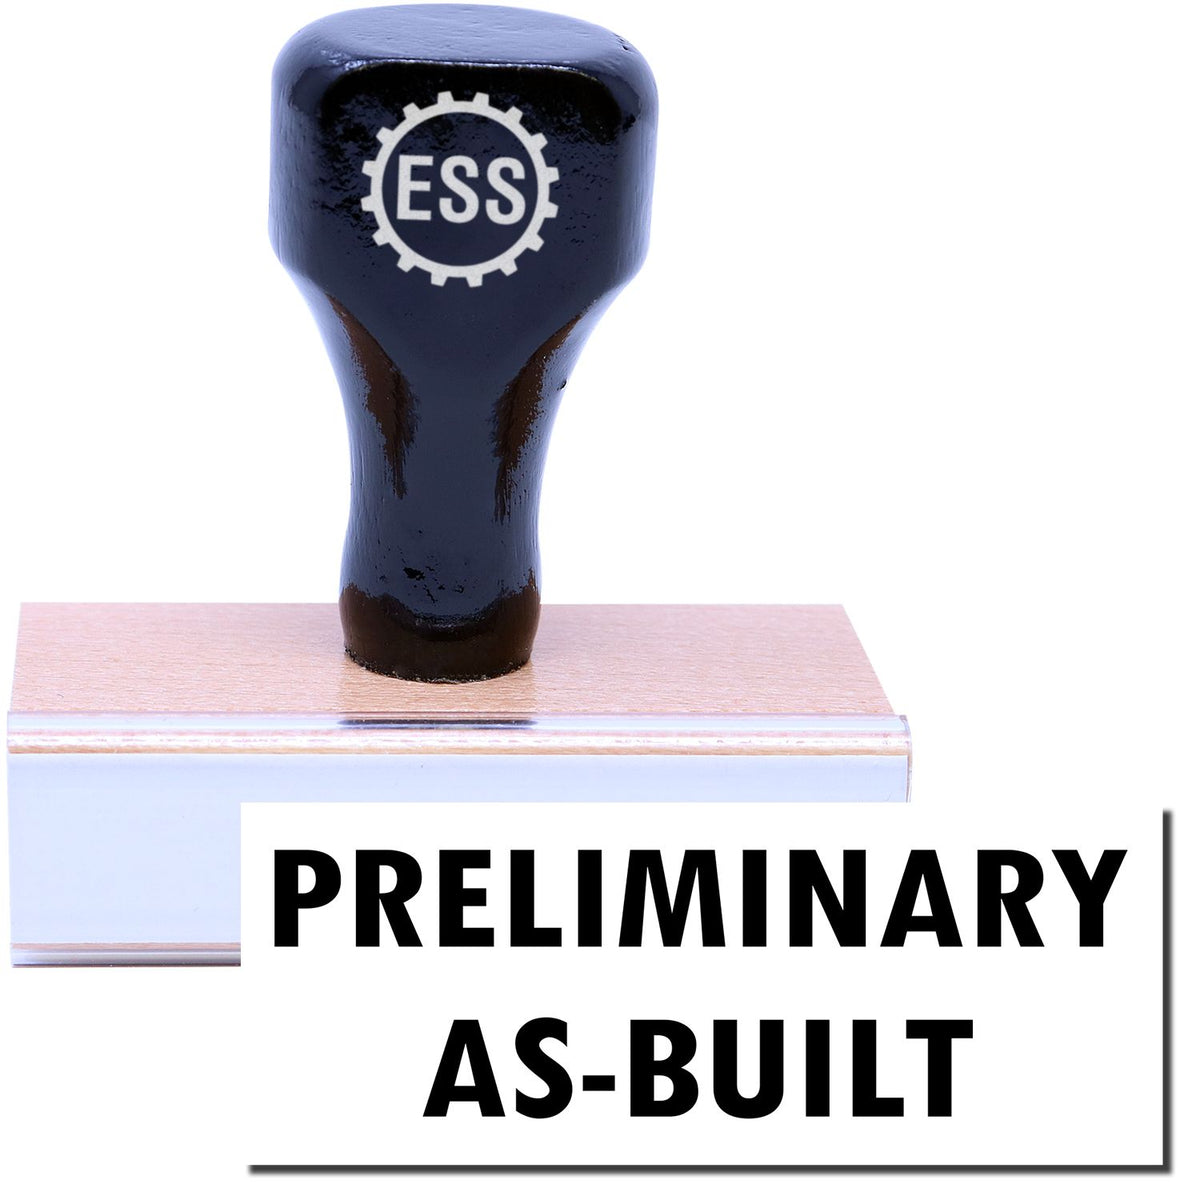 A stock office rubber stamp with a stamped image showing how the text &quot;PRELIMINARY AS-BUILT&quot; in a large font is displayed after stamping.